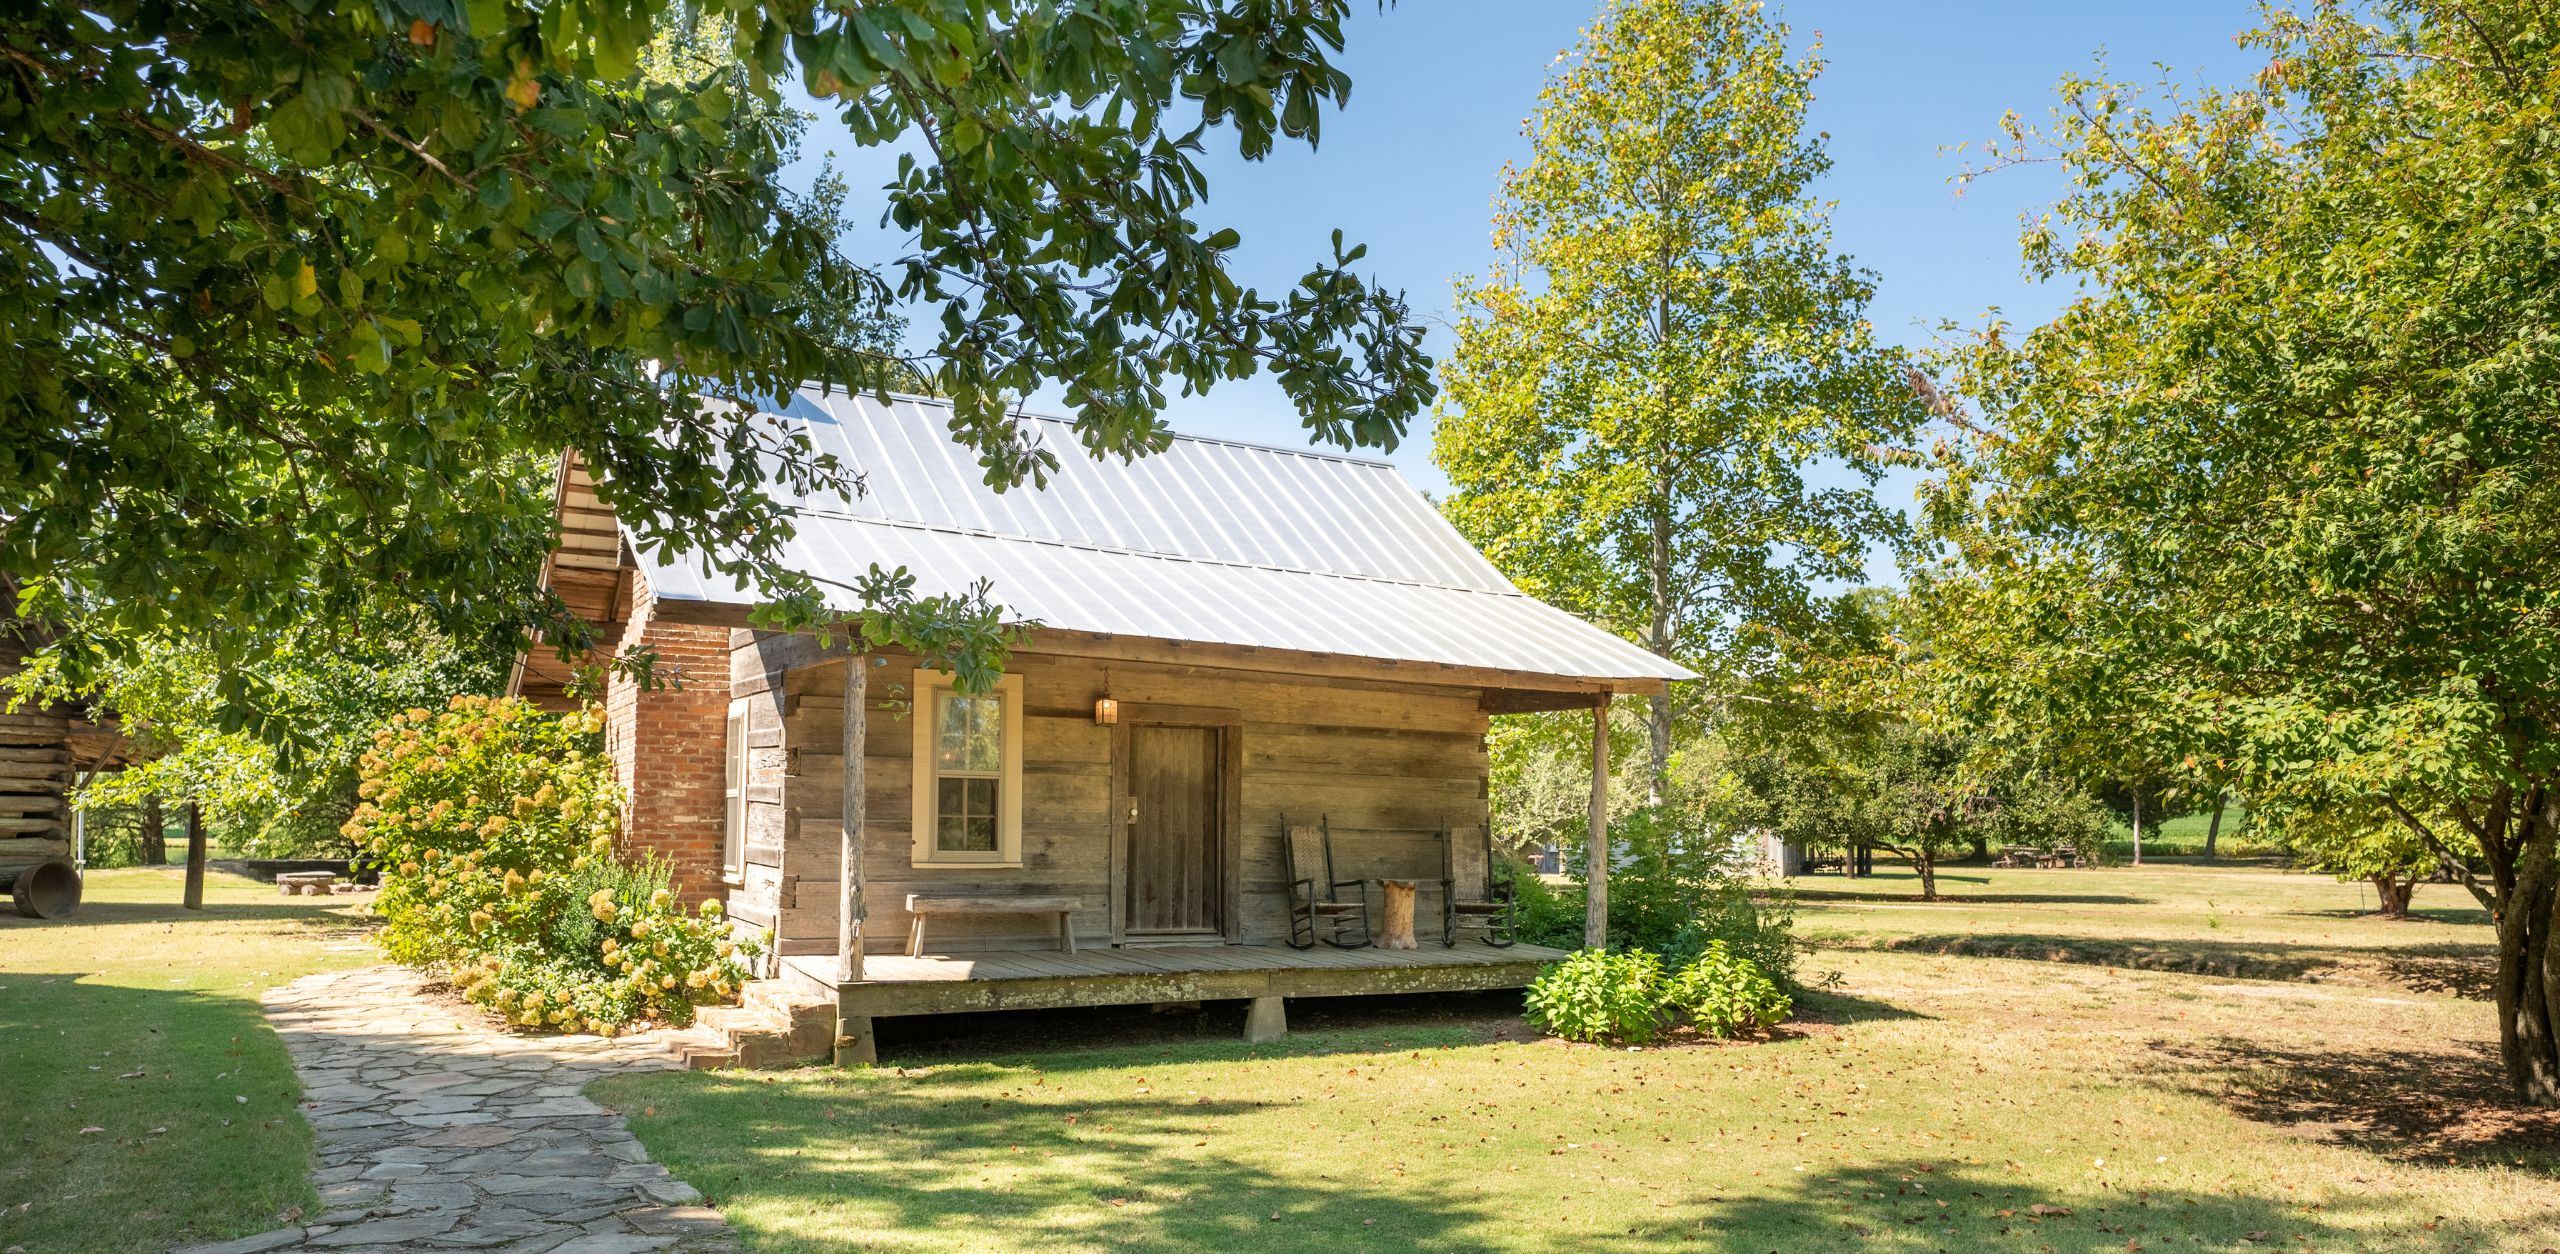 The Cotton Gin Cabin cover